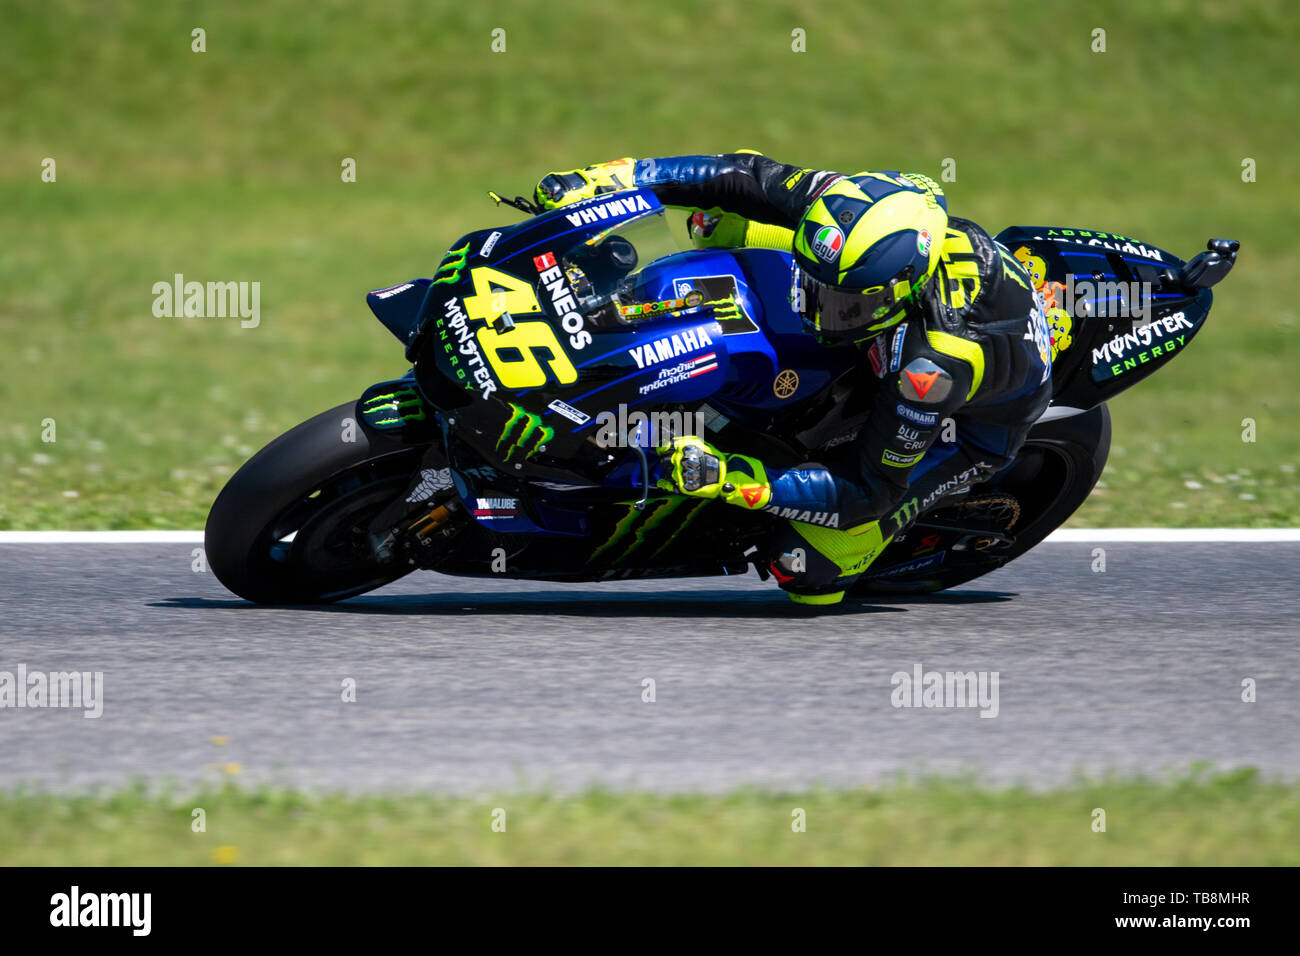 Mugello, Italy. 31st May, 2019. 46 Valentino Rossi during the FP1 Credit: Independent Photo Agency/Alamy Live News Stock Photo